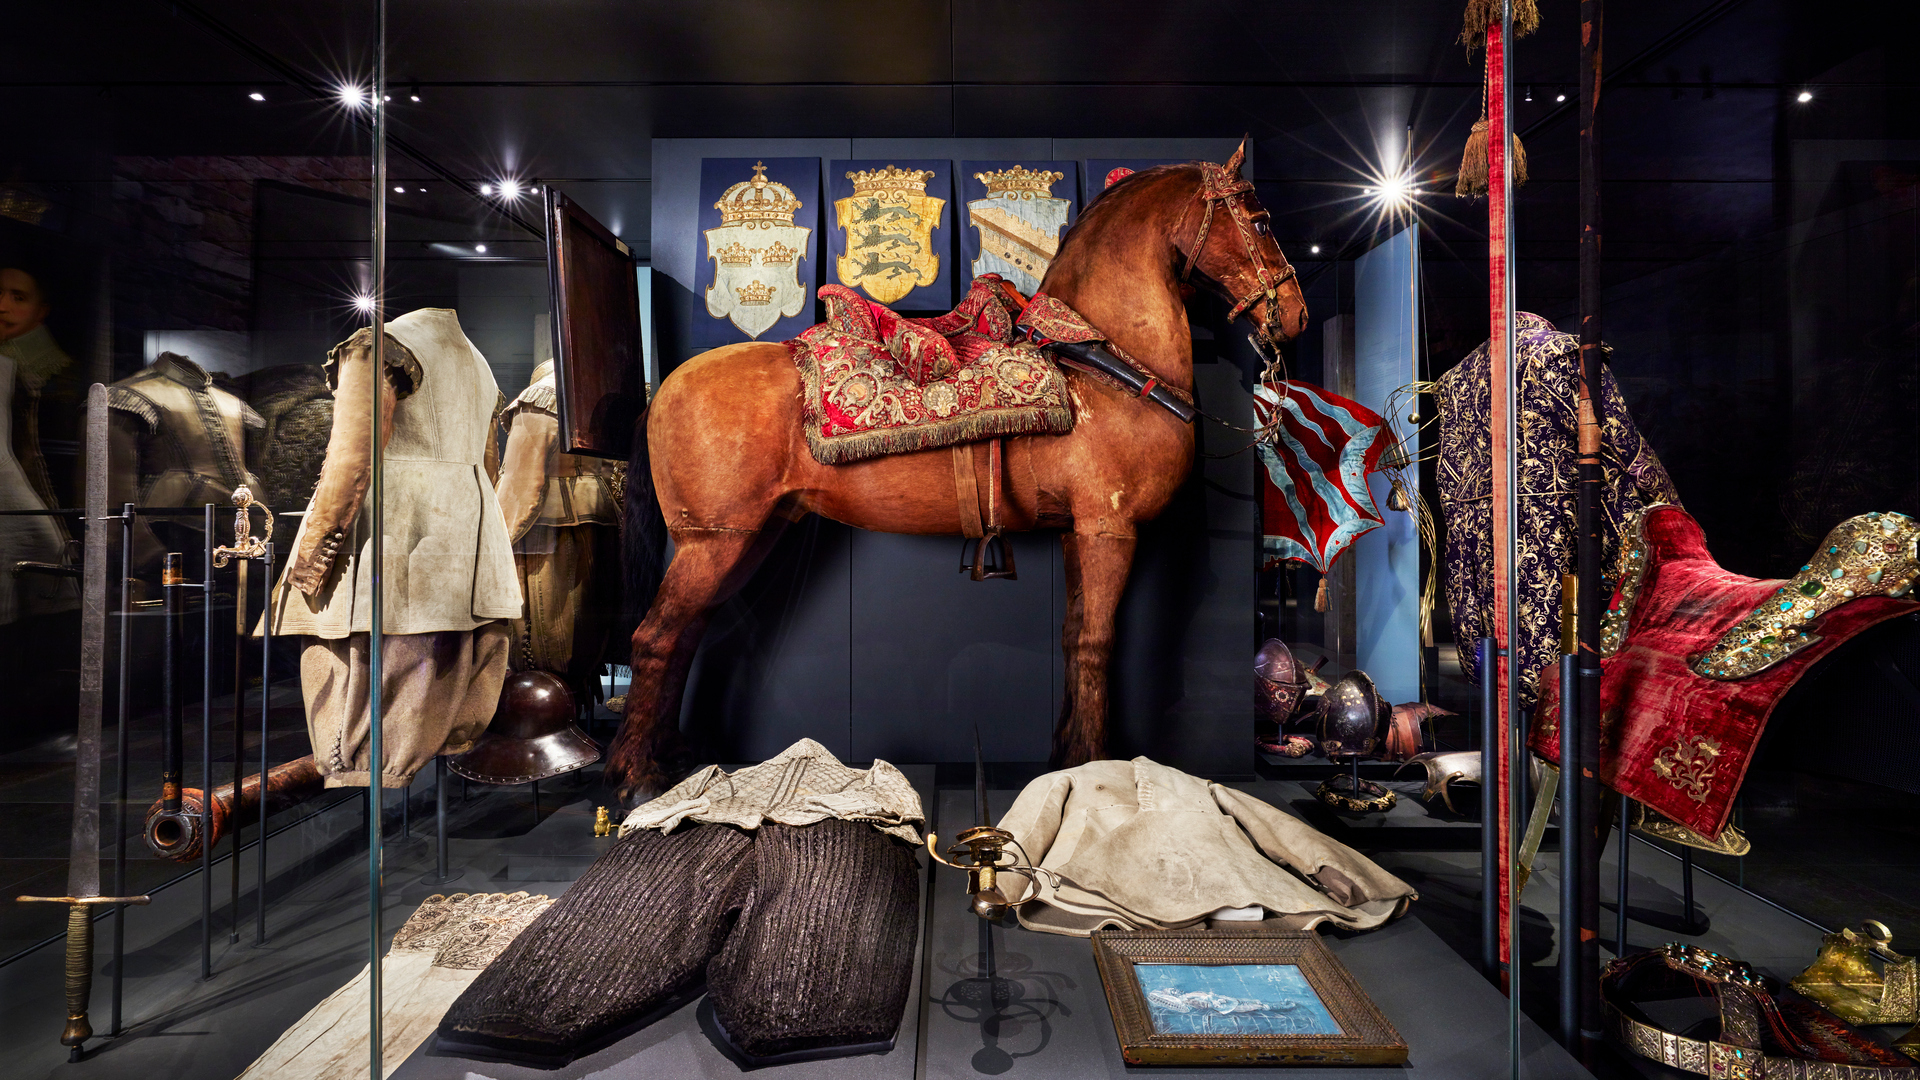 A large show case with a stuffed horse in the middle.